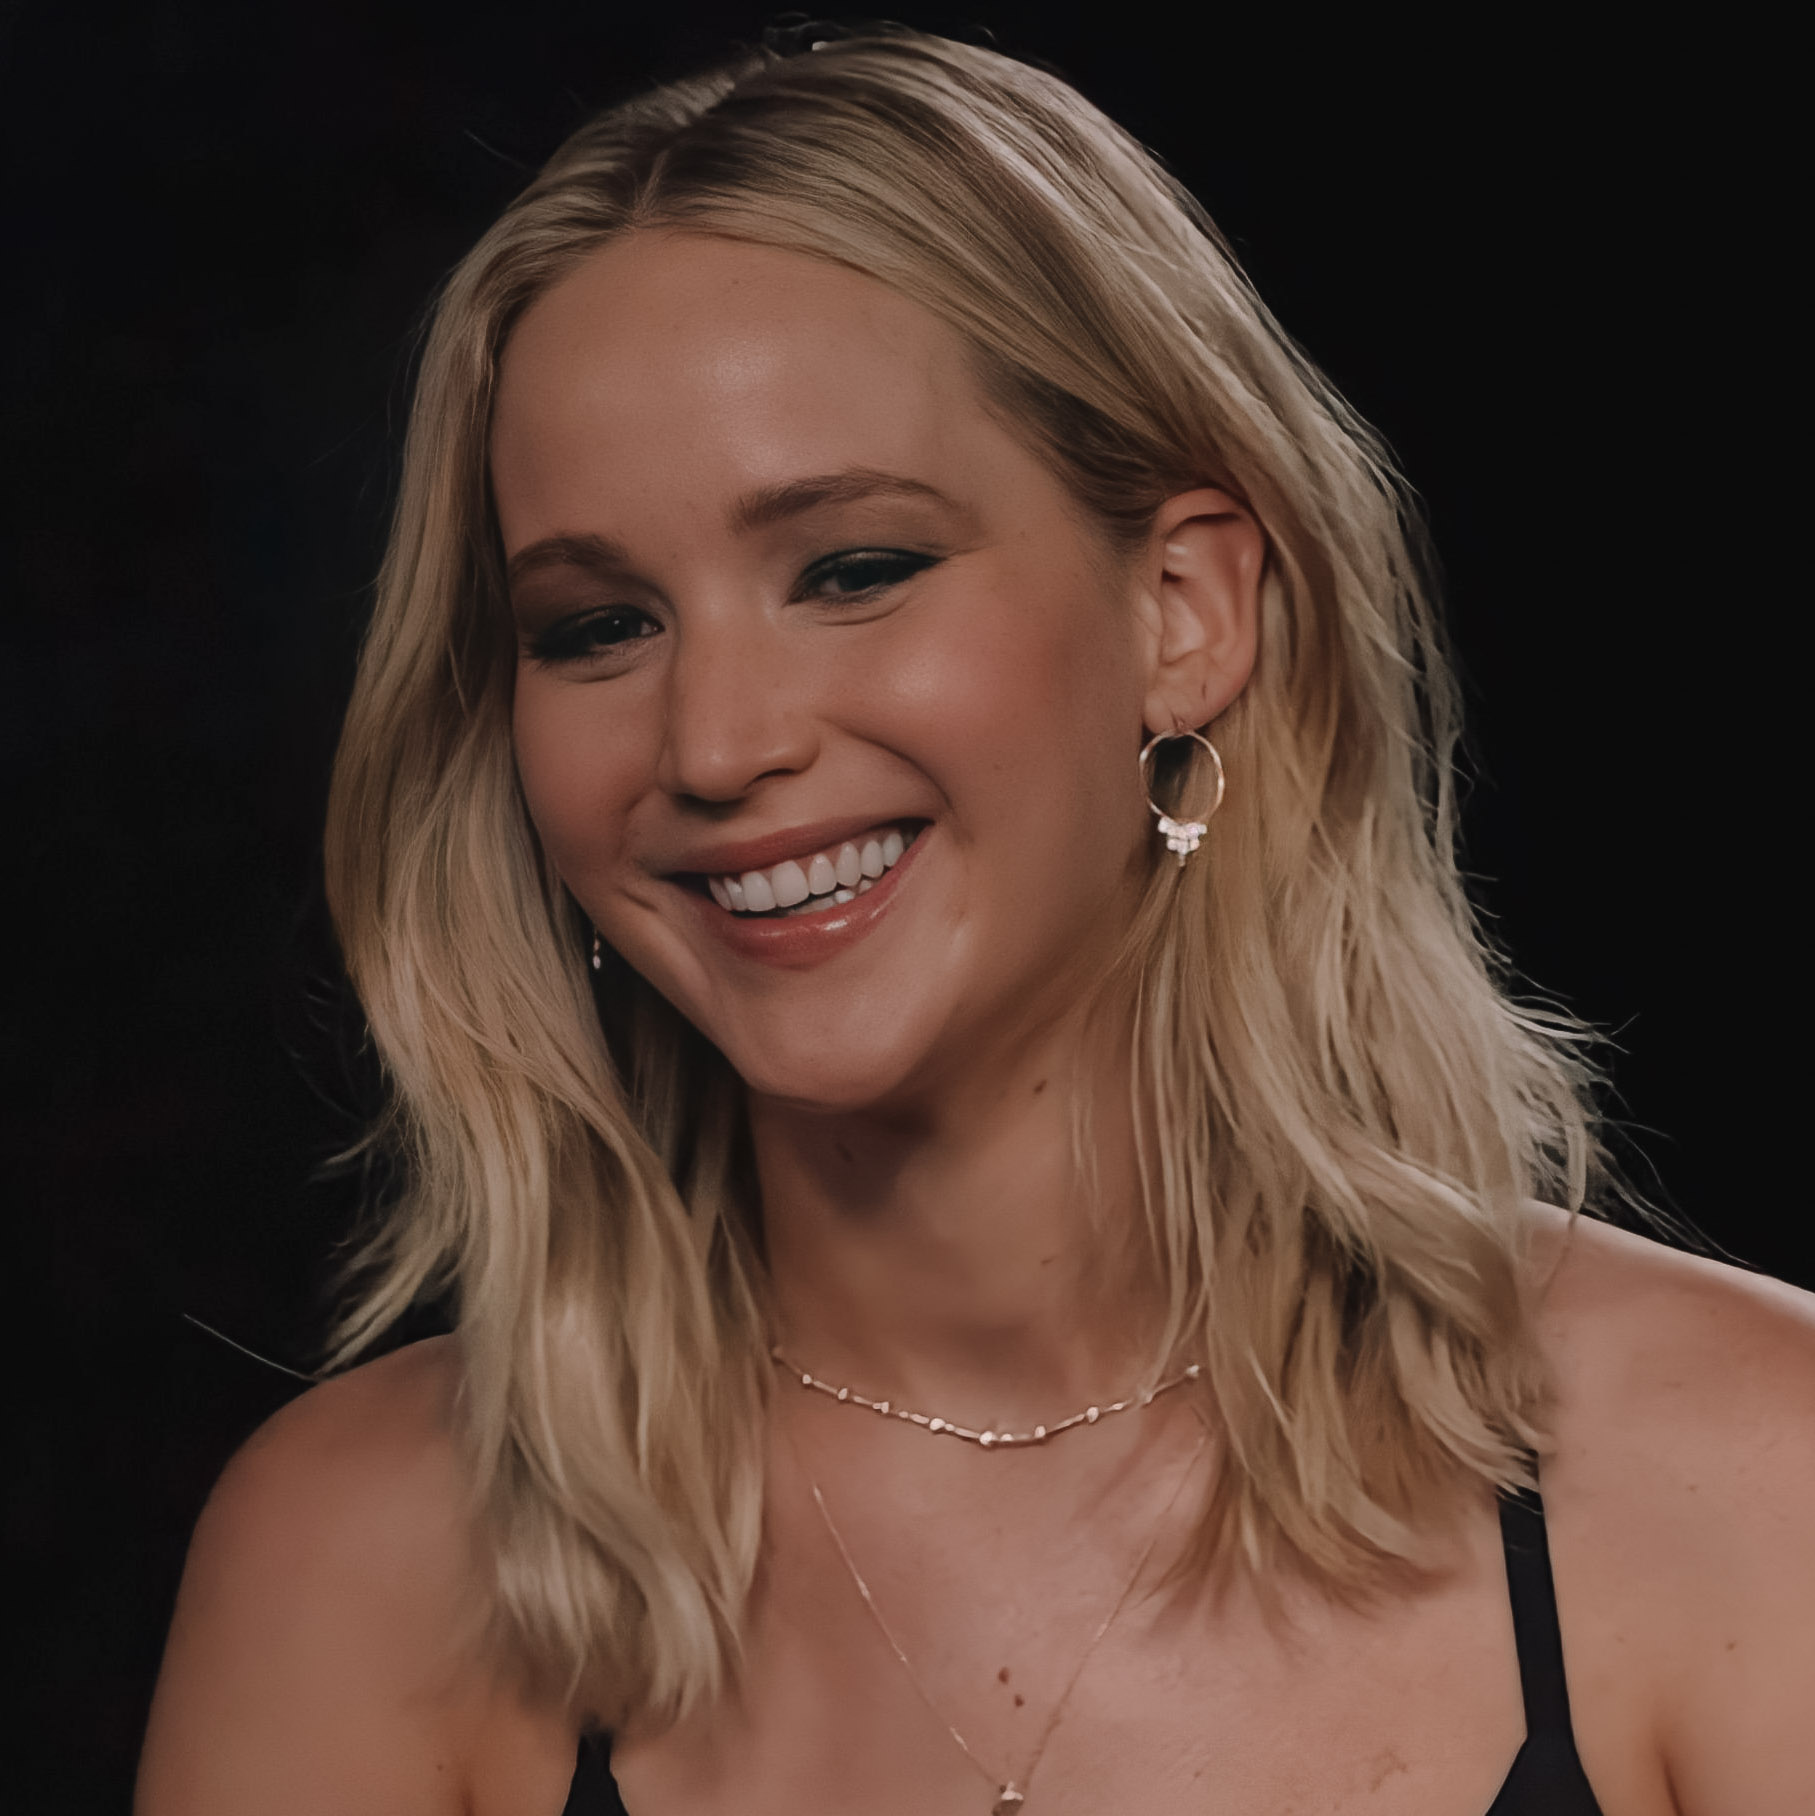 Happy birthday to the most amazing human being on earth, jennifer lawrence. 